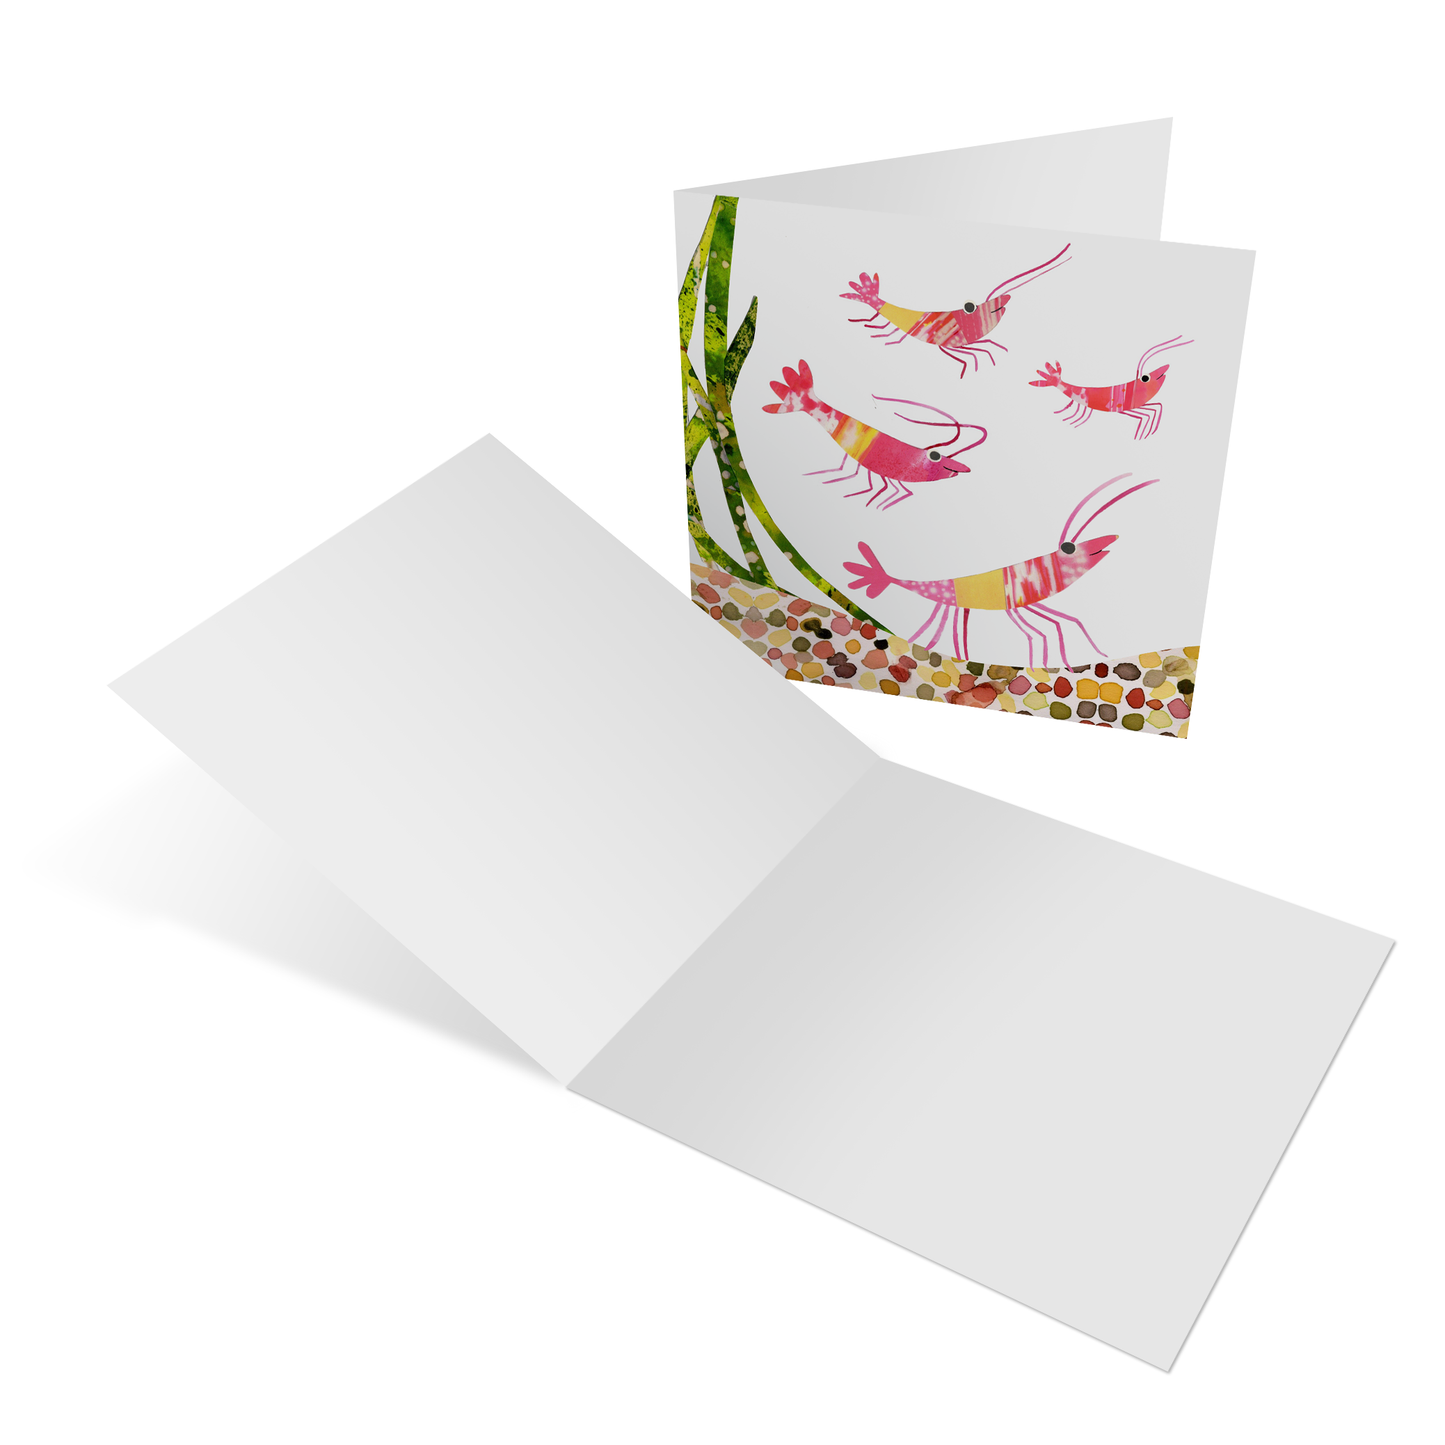 Nature collection of four greeting cards